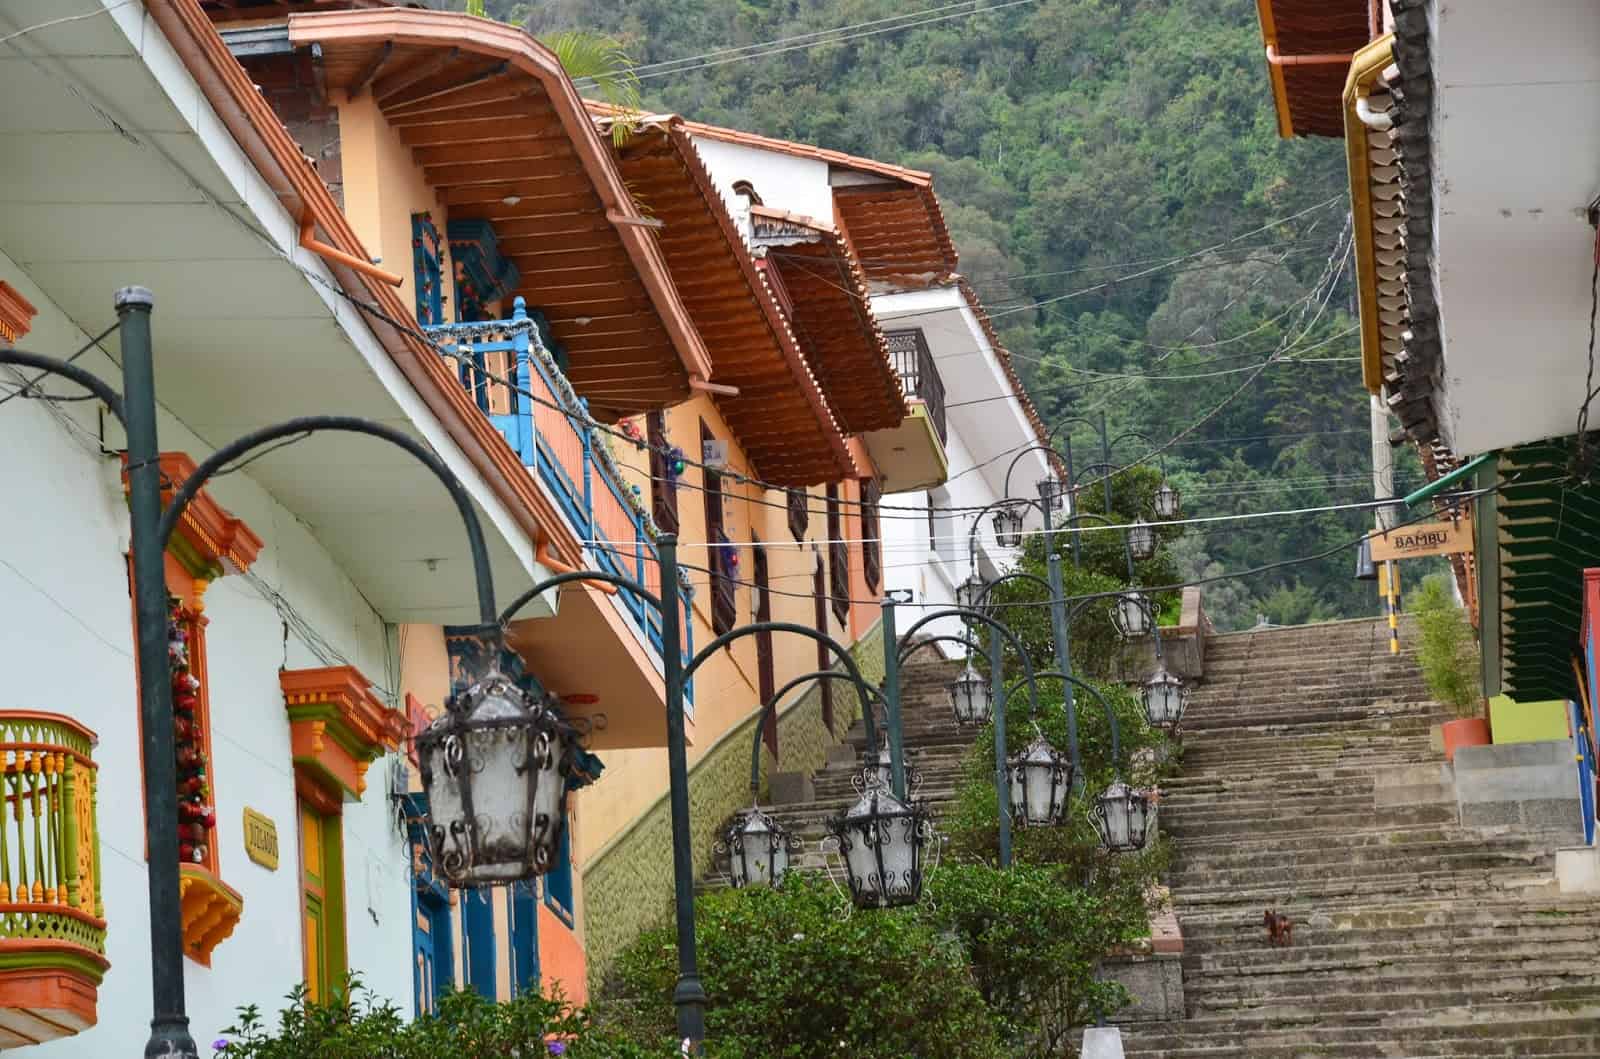 Looking up a stairway in Jericó, Antioquia, Colombia